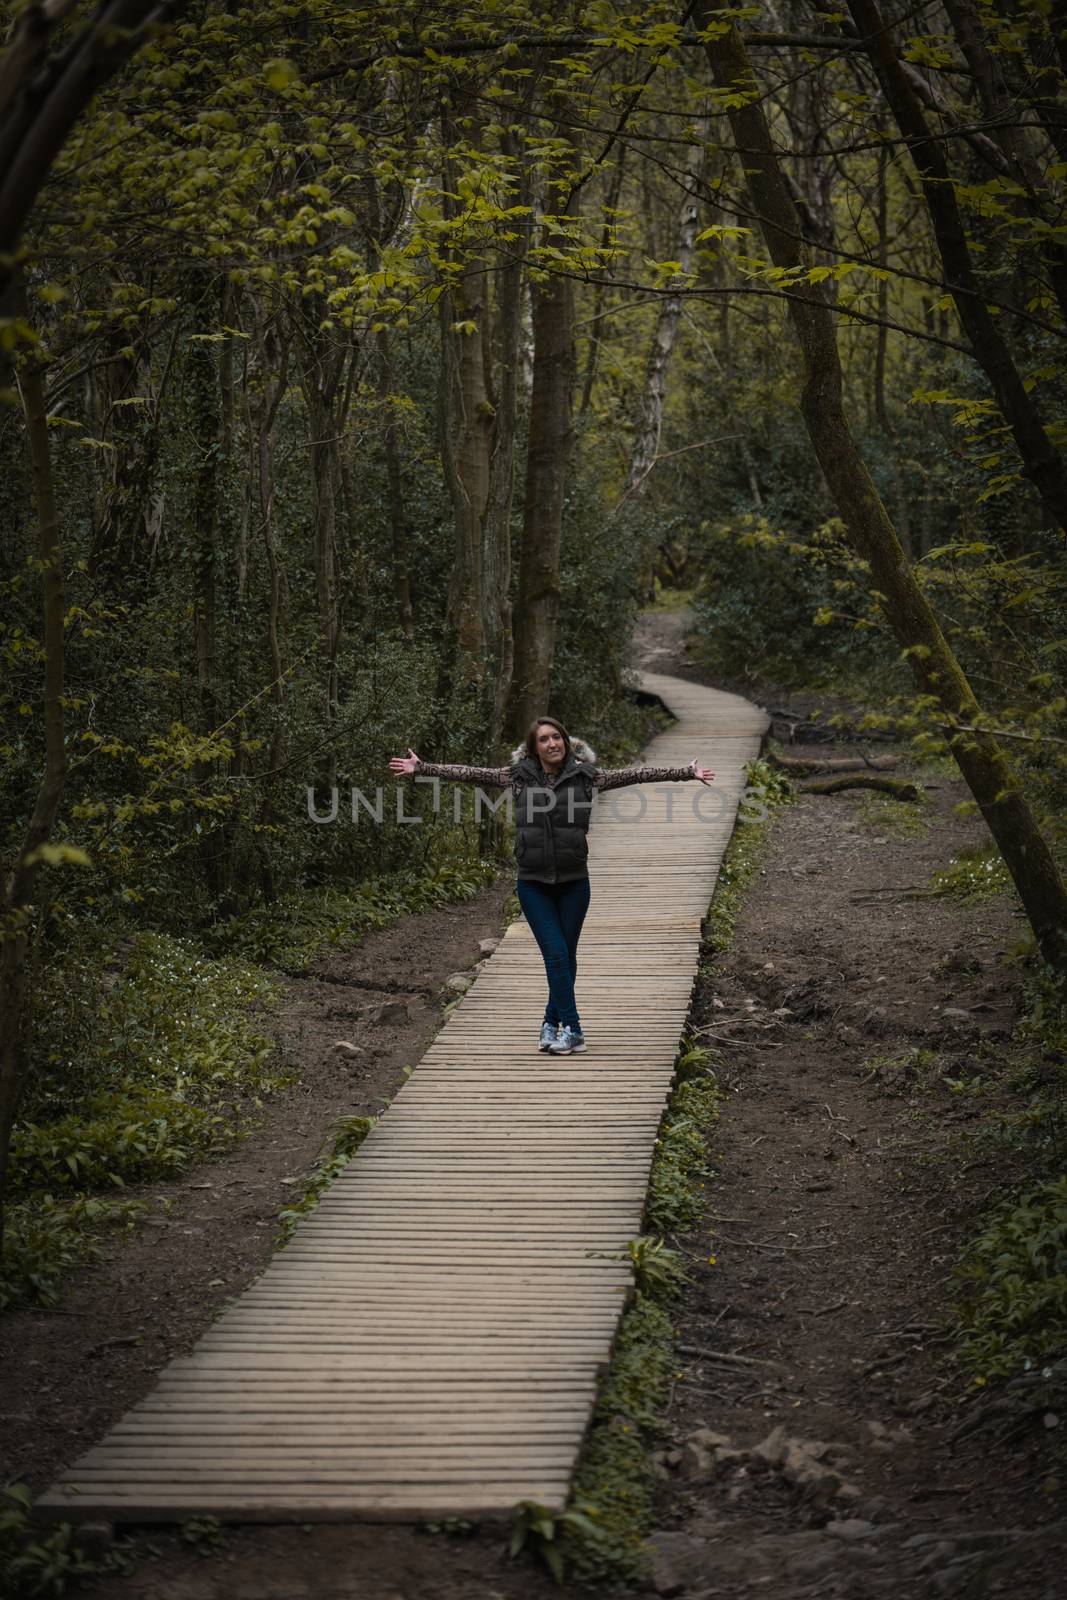 A young woman stood on a wooden pavement path in the countryside